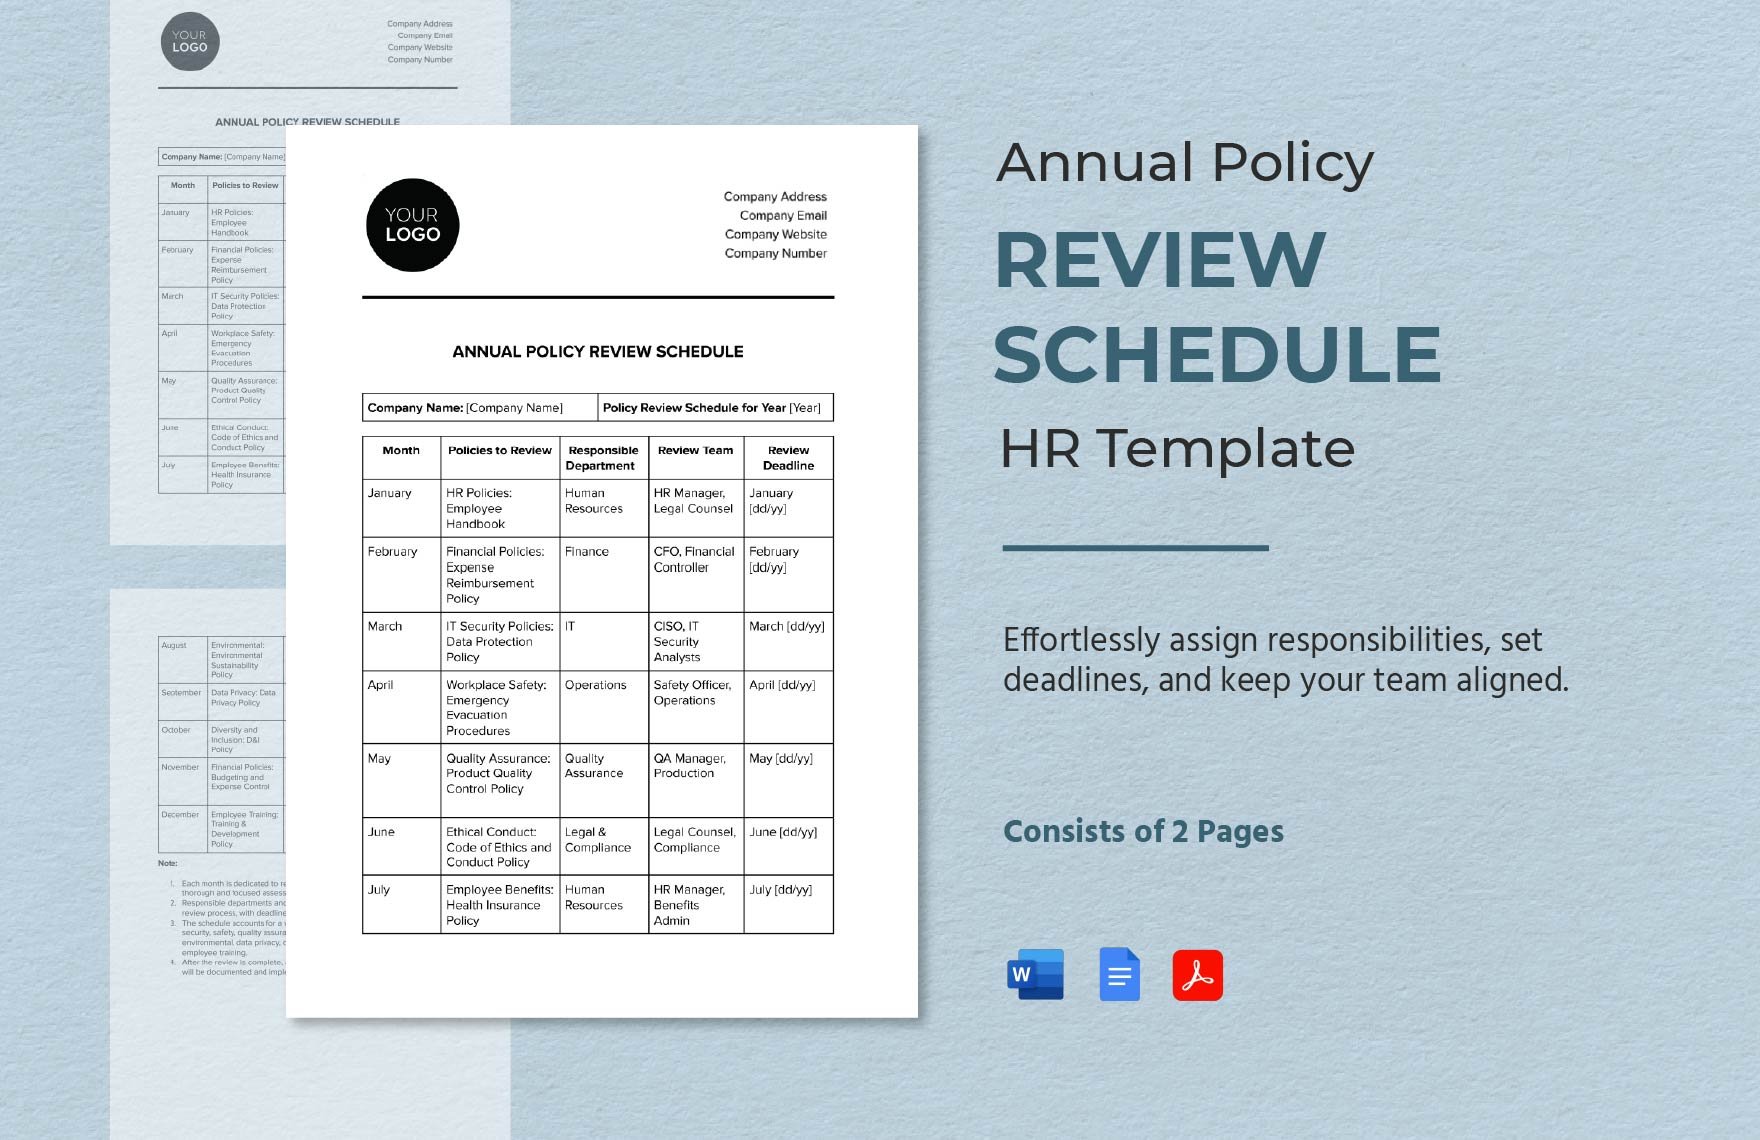 Annual Policy Review Schedule HR Template